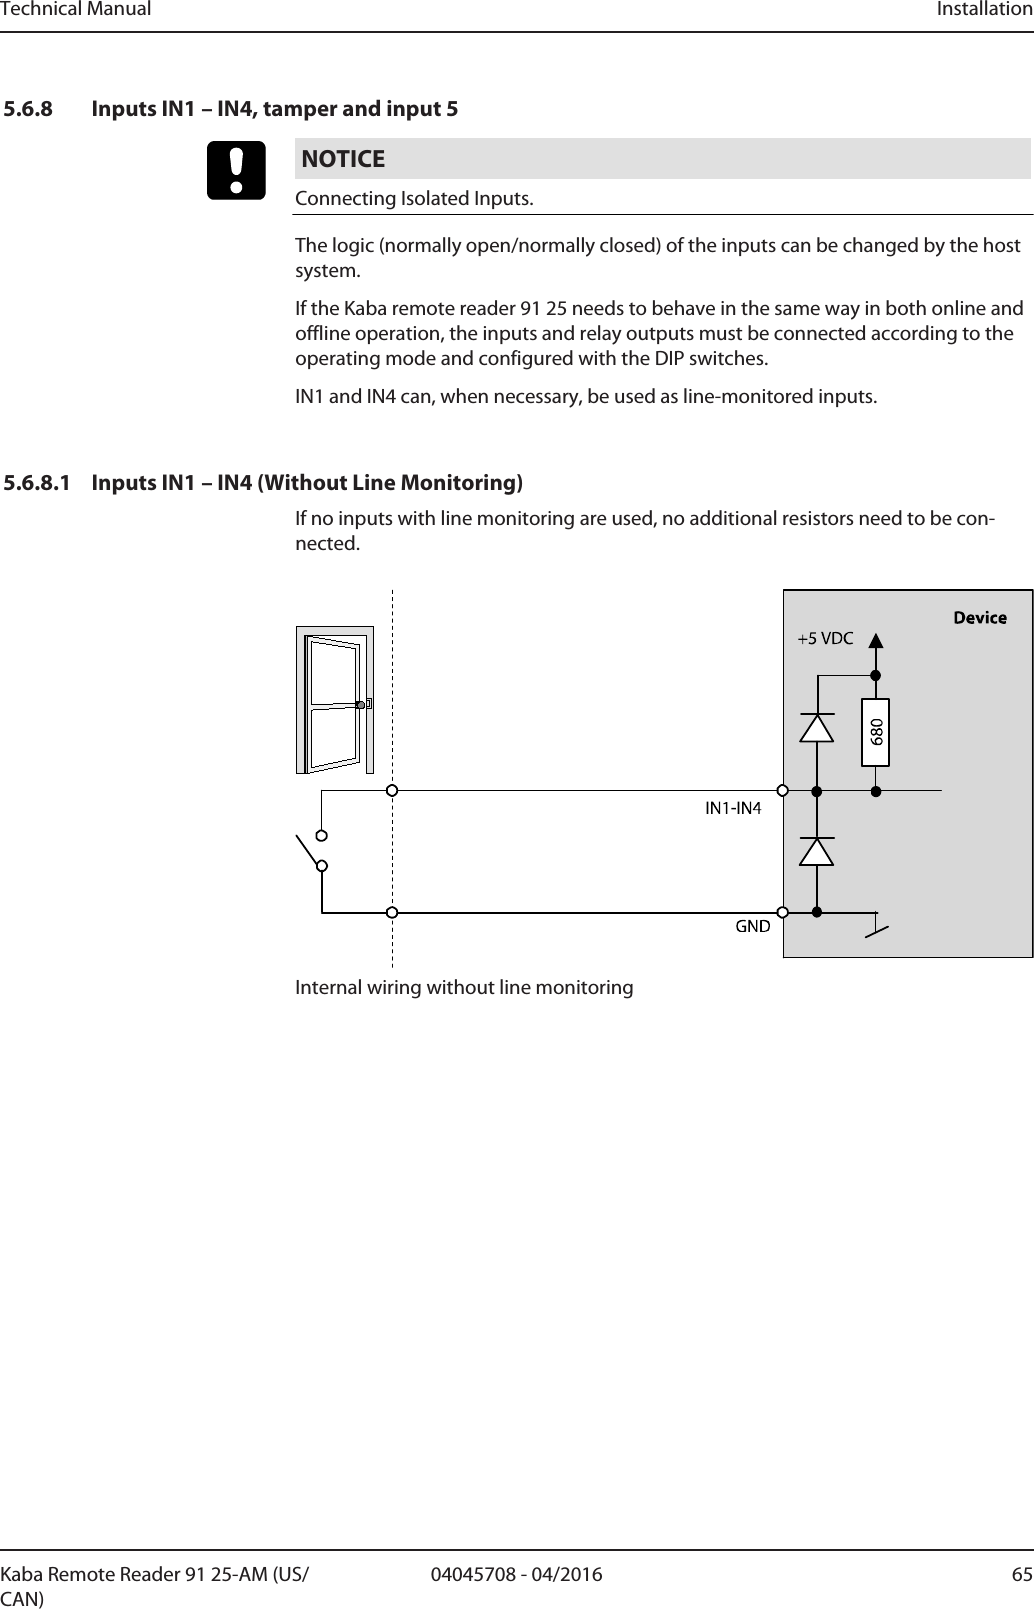 Technical Manual Installation6504045708 - 04/2016Kaba Remote Reader 91 25-AM (US/CAN)5.6.8 Inputs IN1 – IN4, tamper and input 5NOTICEConnecting Isolated Inputs.The logic (normally open/normally closed) of the inputs can be changed by the hostsystem.If the Kaba remote reader 91 25 needs to behave in the same way in both online andoffline operation, the inputs and relay outputs must be connected according to theoperating mode and configured with the DIP switches.IN1 and IN4 can, when necessary, be used as line-monitored inputs.5.6.8.1 Inputs IN1 – IN4 (Without Line Monitoring)If no inputs with line monitoring are used, no additional resistors need to be con-nected.Internal wiring without line monitoring